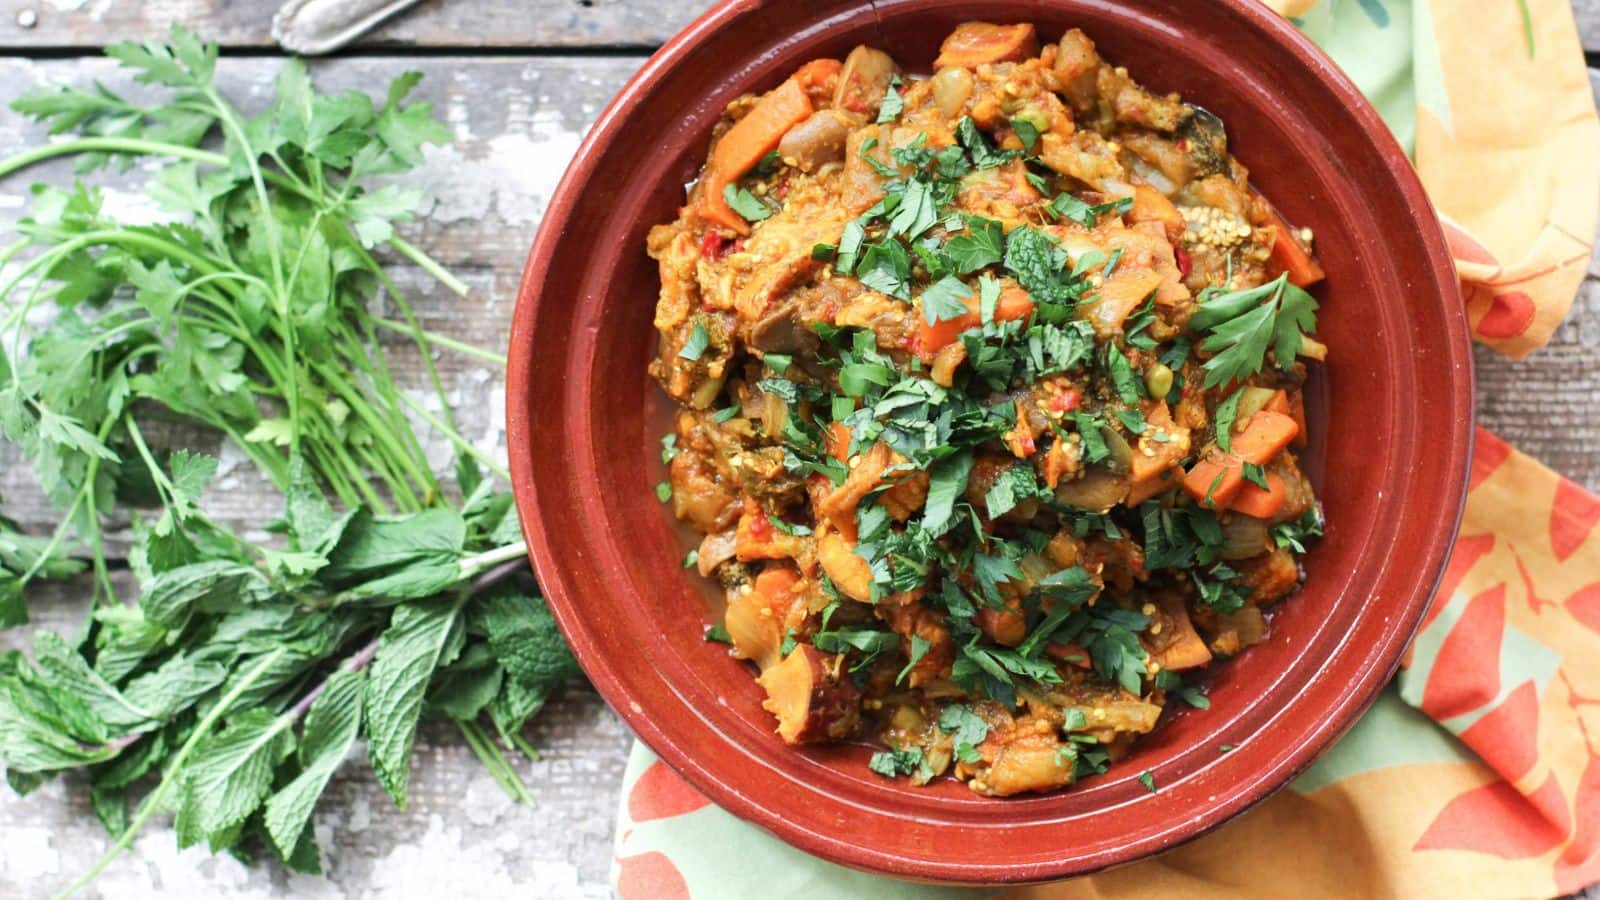 Make this delicious vegetarian Moroccan tagine at home